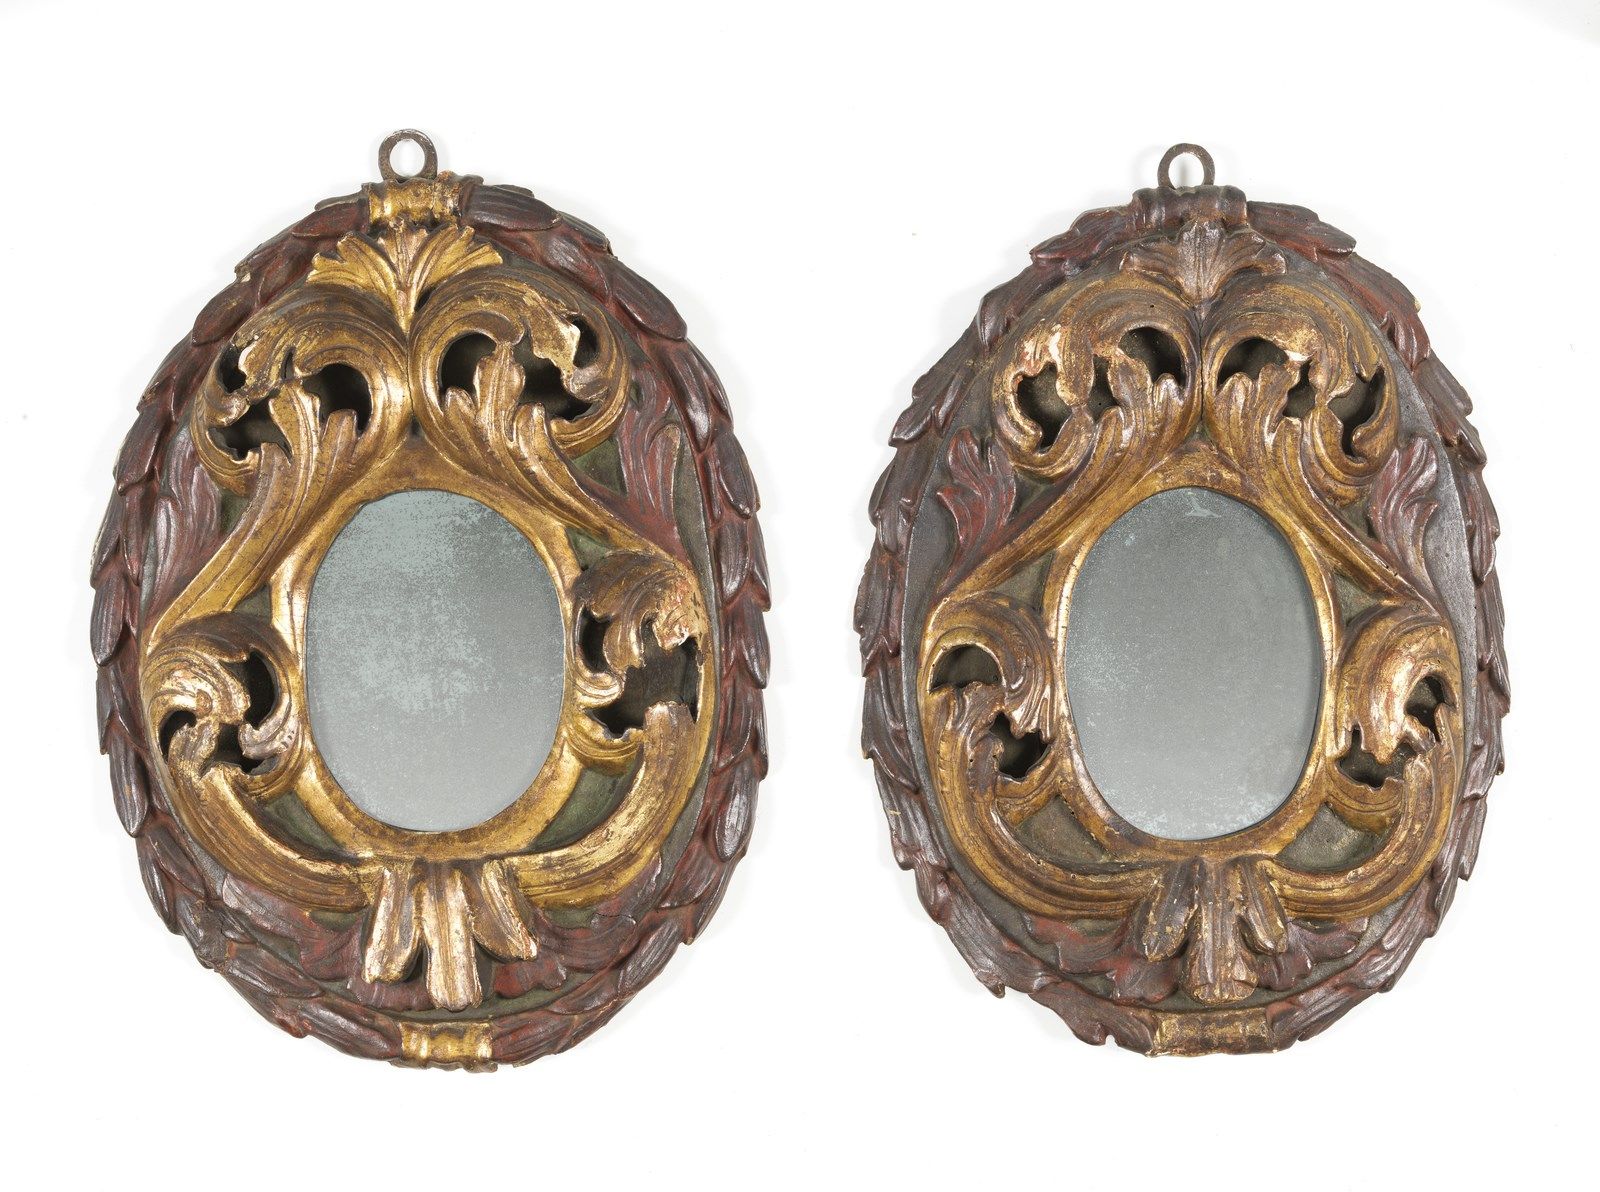 MANIFATTURA DEL XVIII SECOLO Pair of baroque parcel gilt wood frames carved with&hellip;